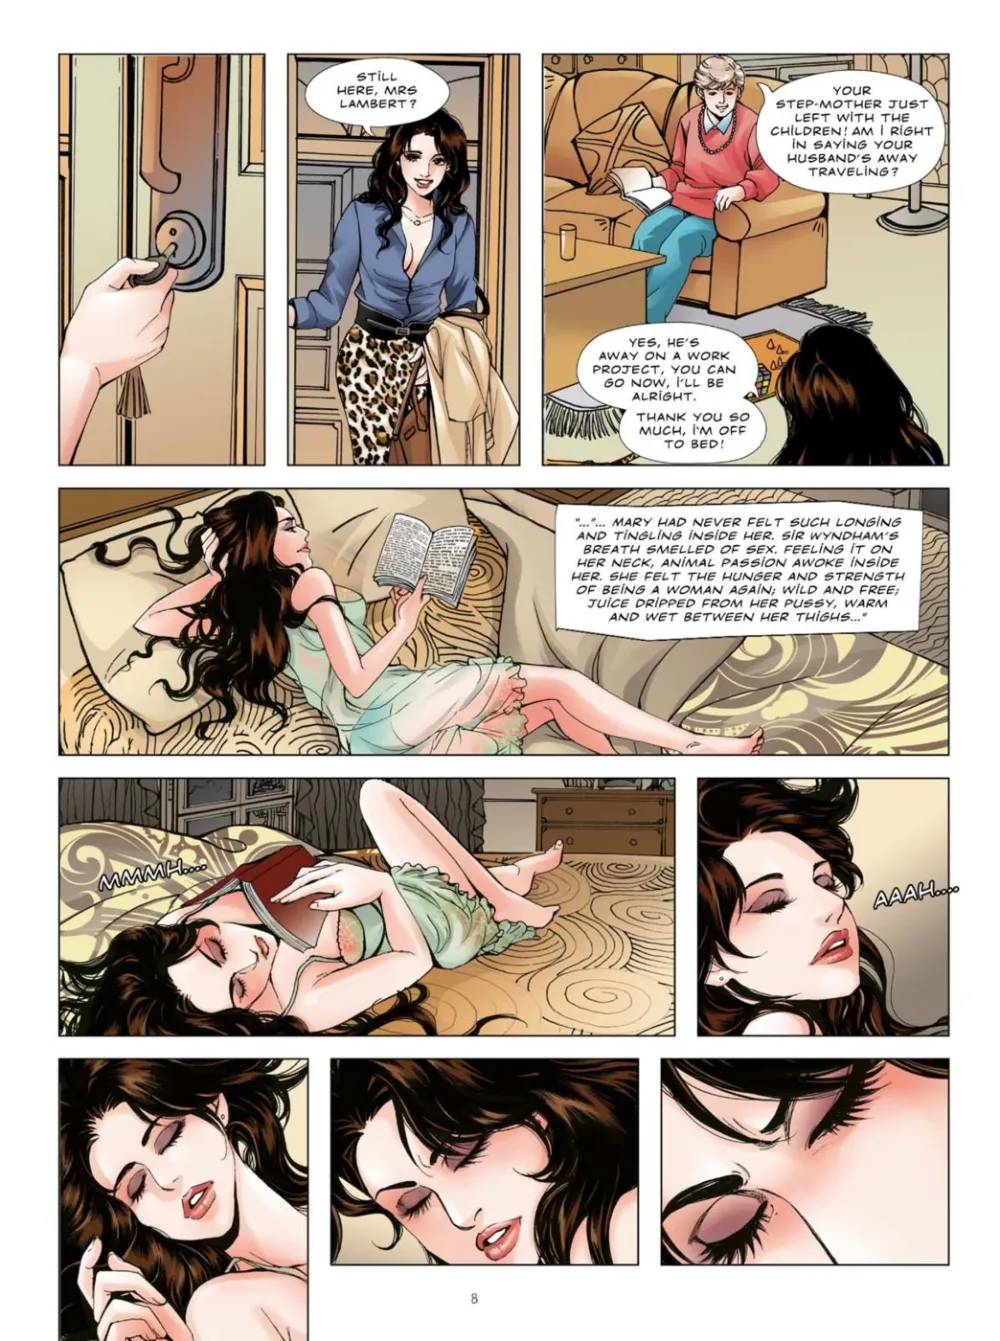 Her Night – A Woman’s Fantasy - Page 8